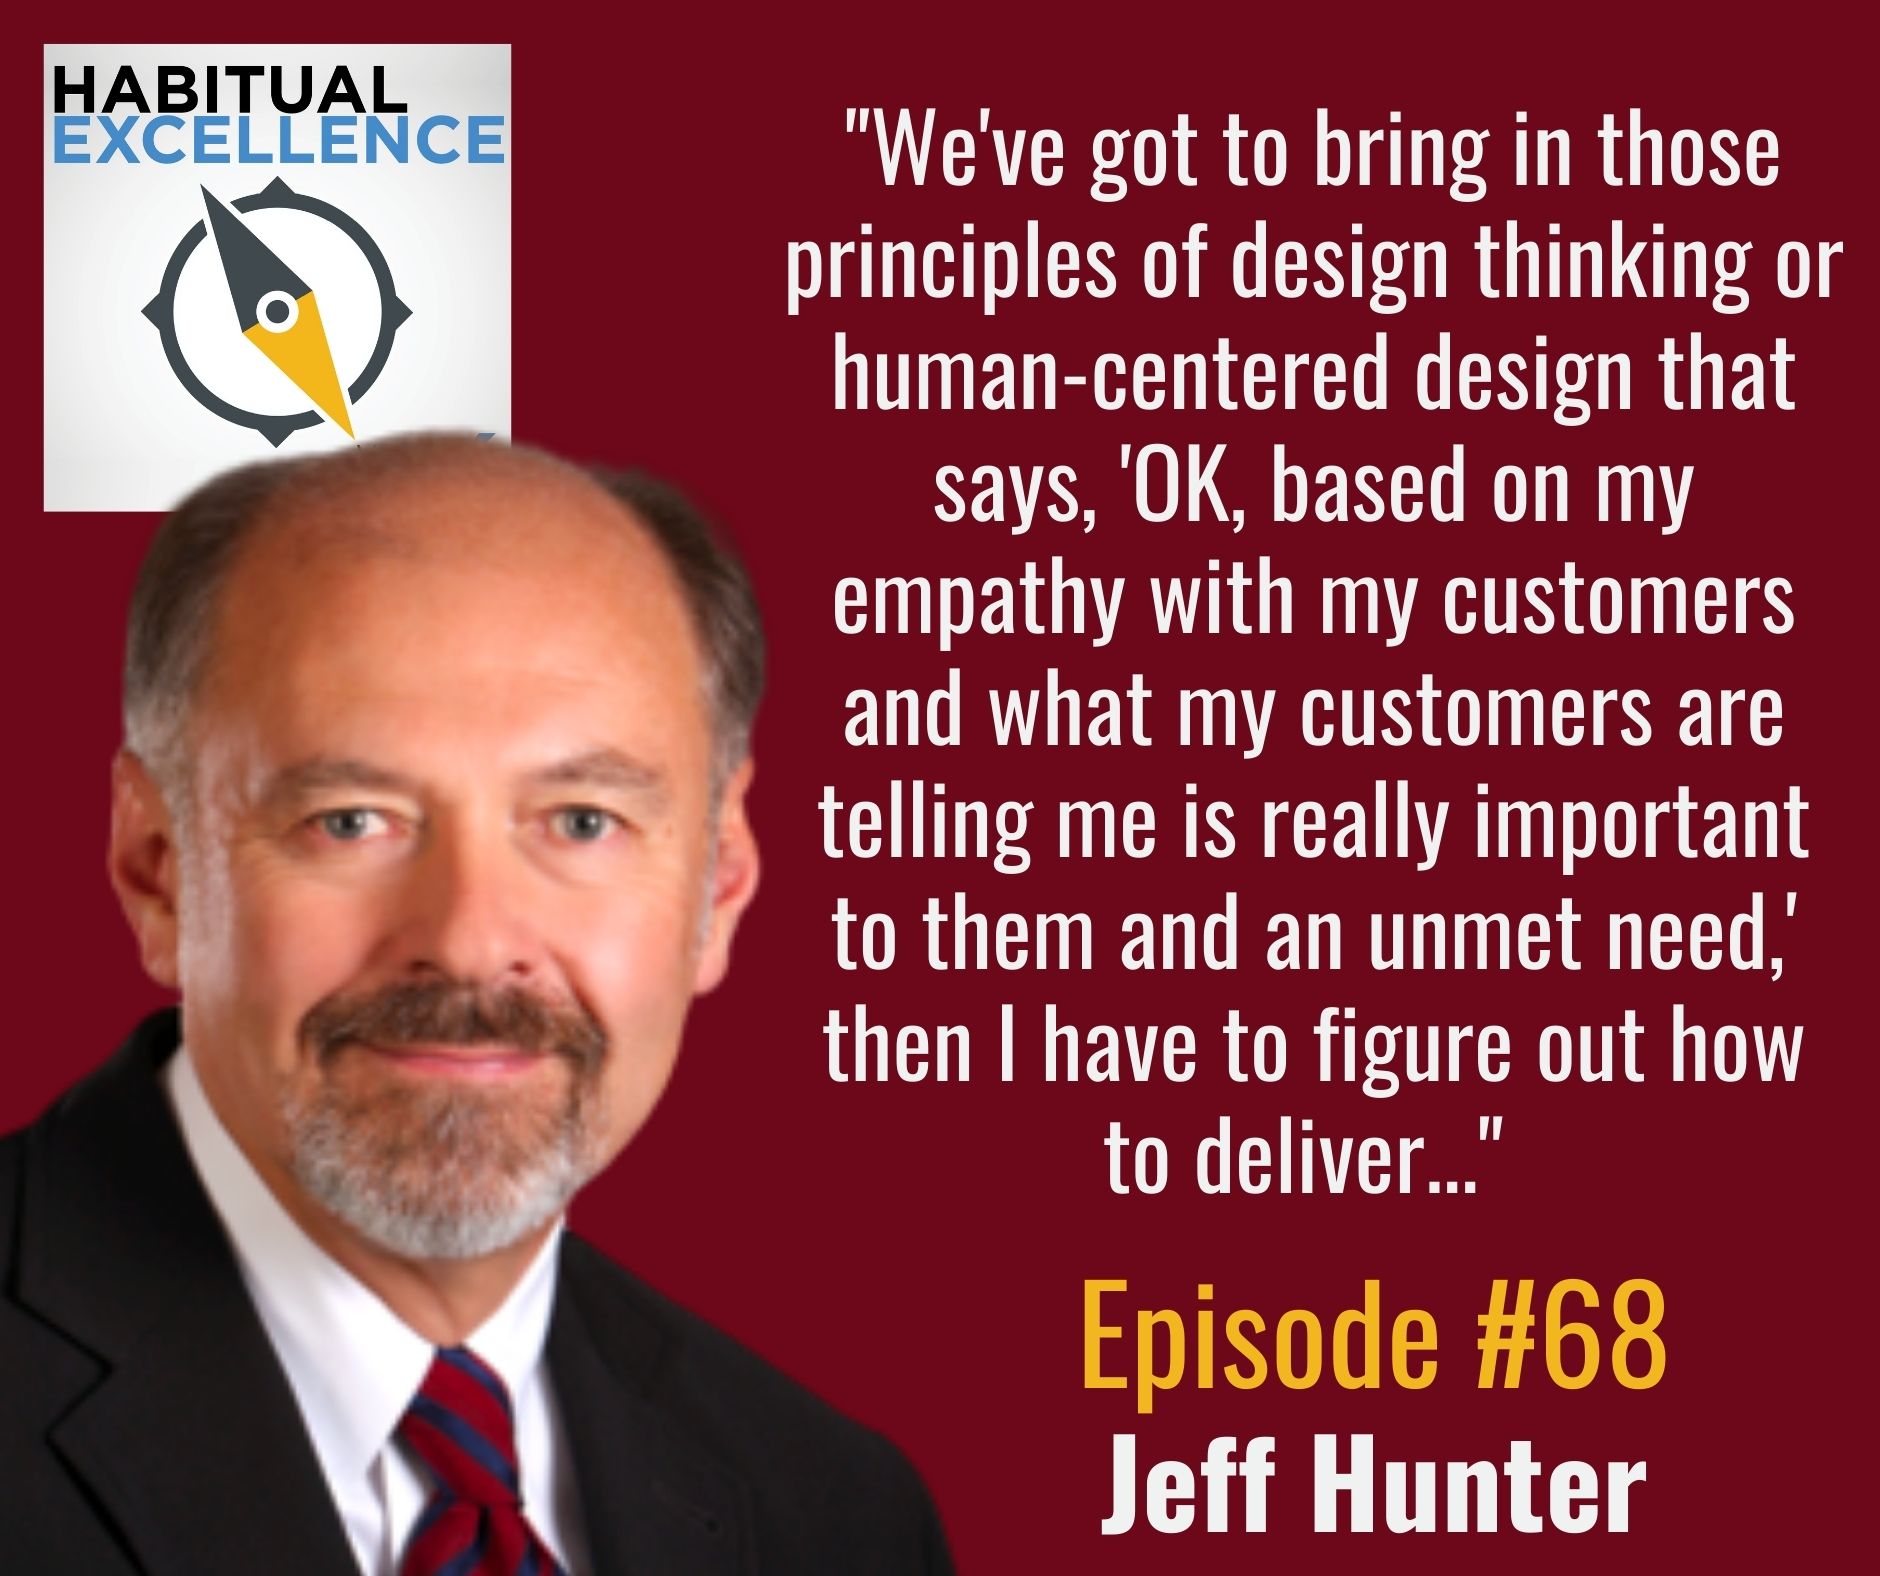 "We've got to bring in those principles of design thinking or human-centered design that says, 'OK, based on my empathy with my customers and what my customers are telling me is really important to them and an unmet need,' then I have to figure out how to deliver..." 